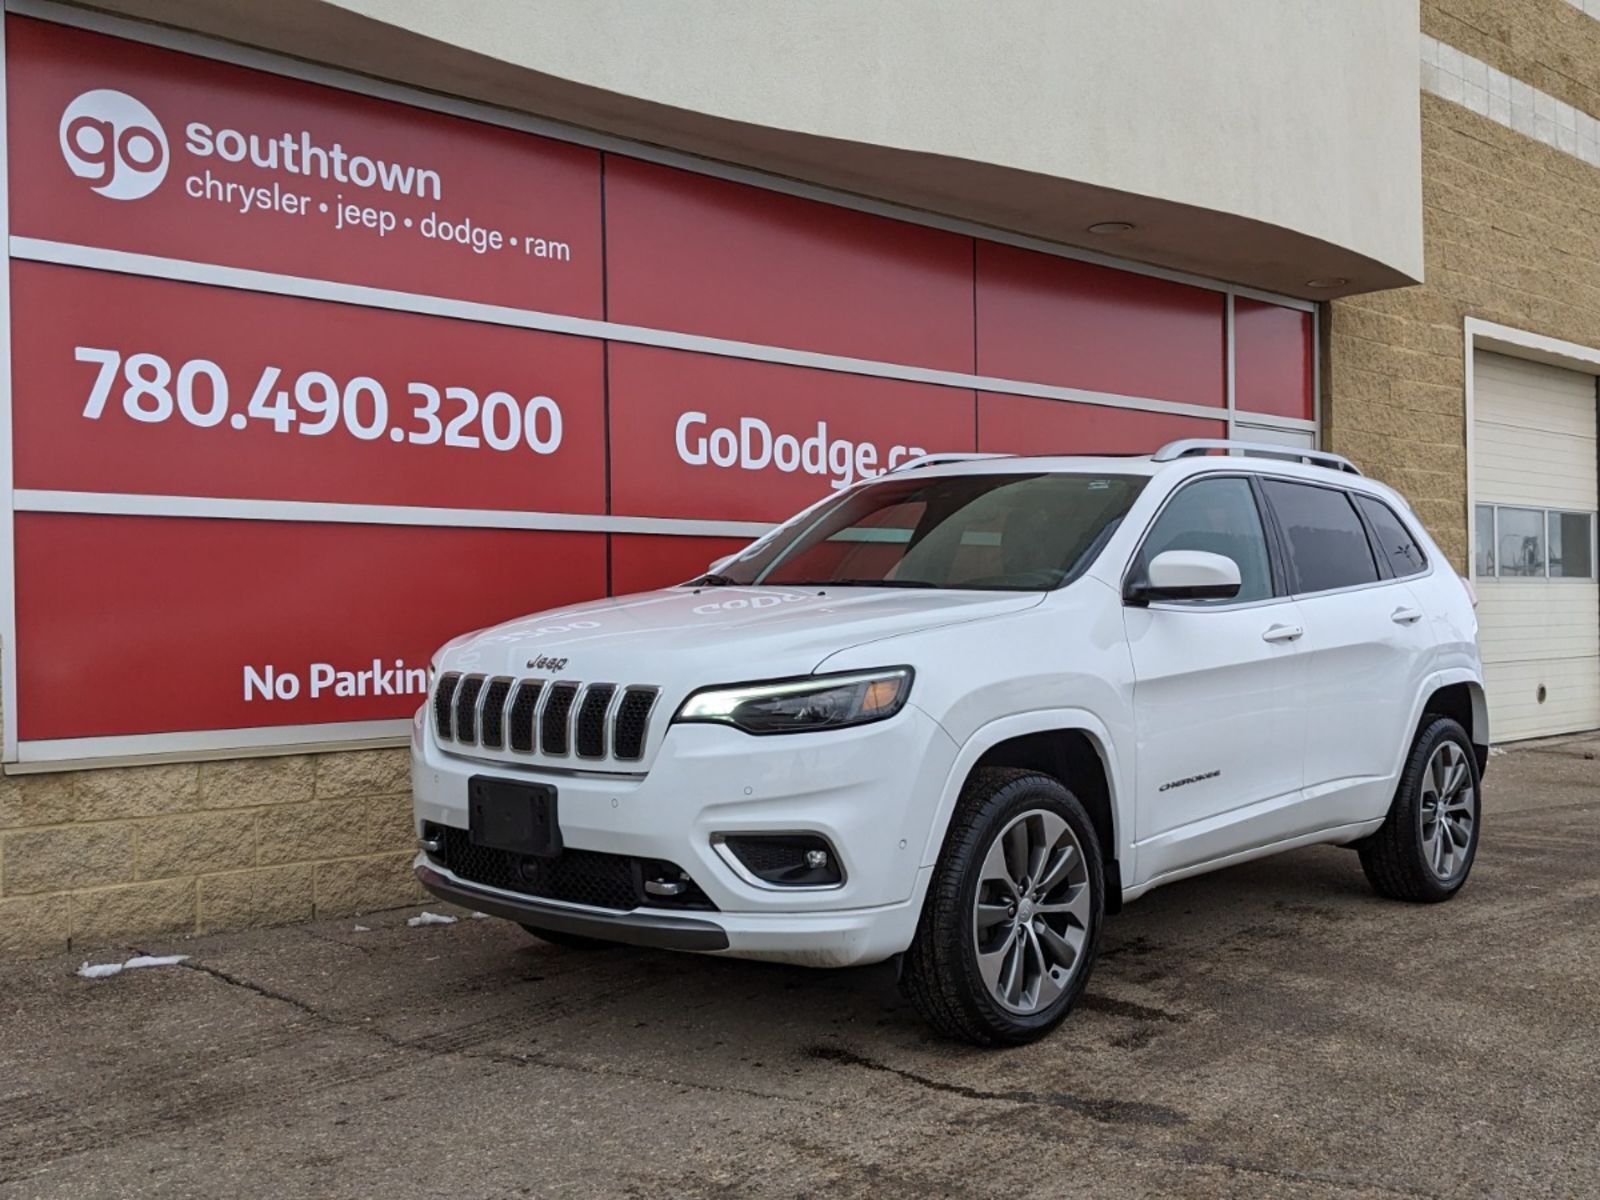 2019 Jeep Cherokee OVERLAND CHEROKEE, PANO ROOF, 2 SETS OF TIRES, FUL